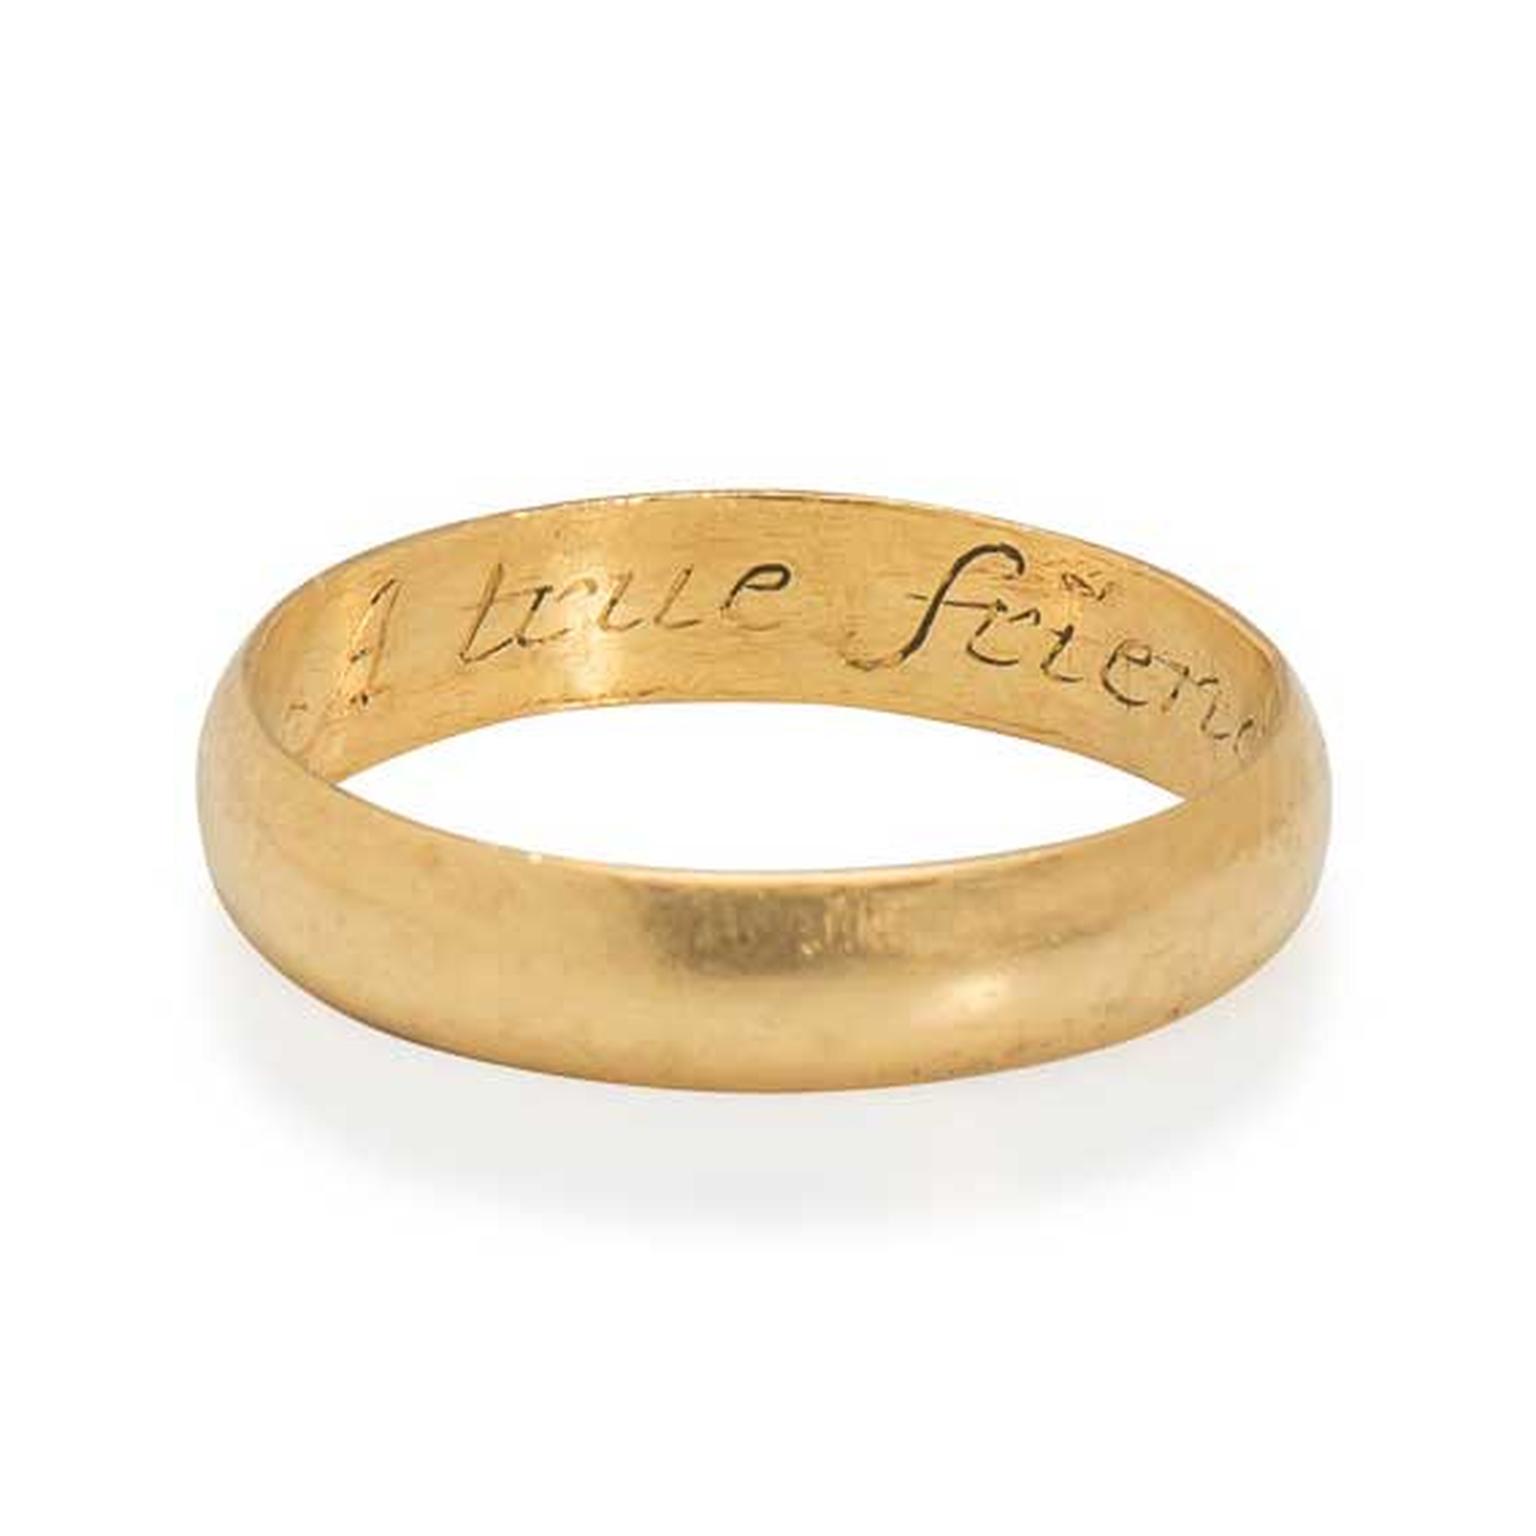 The Graces posey ring